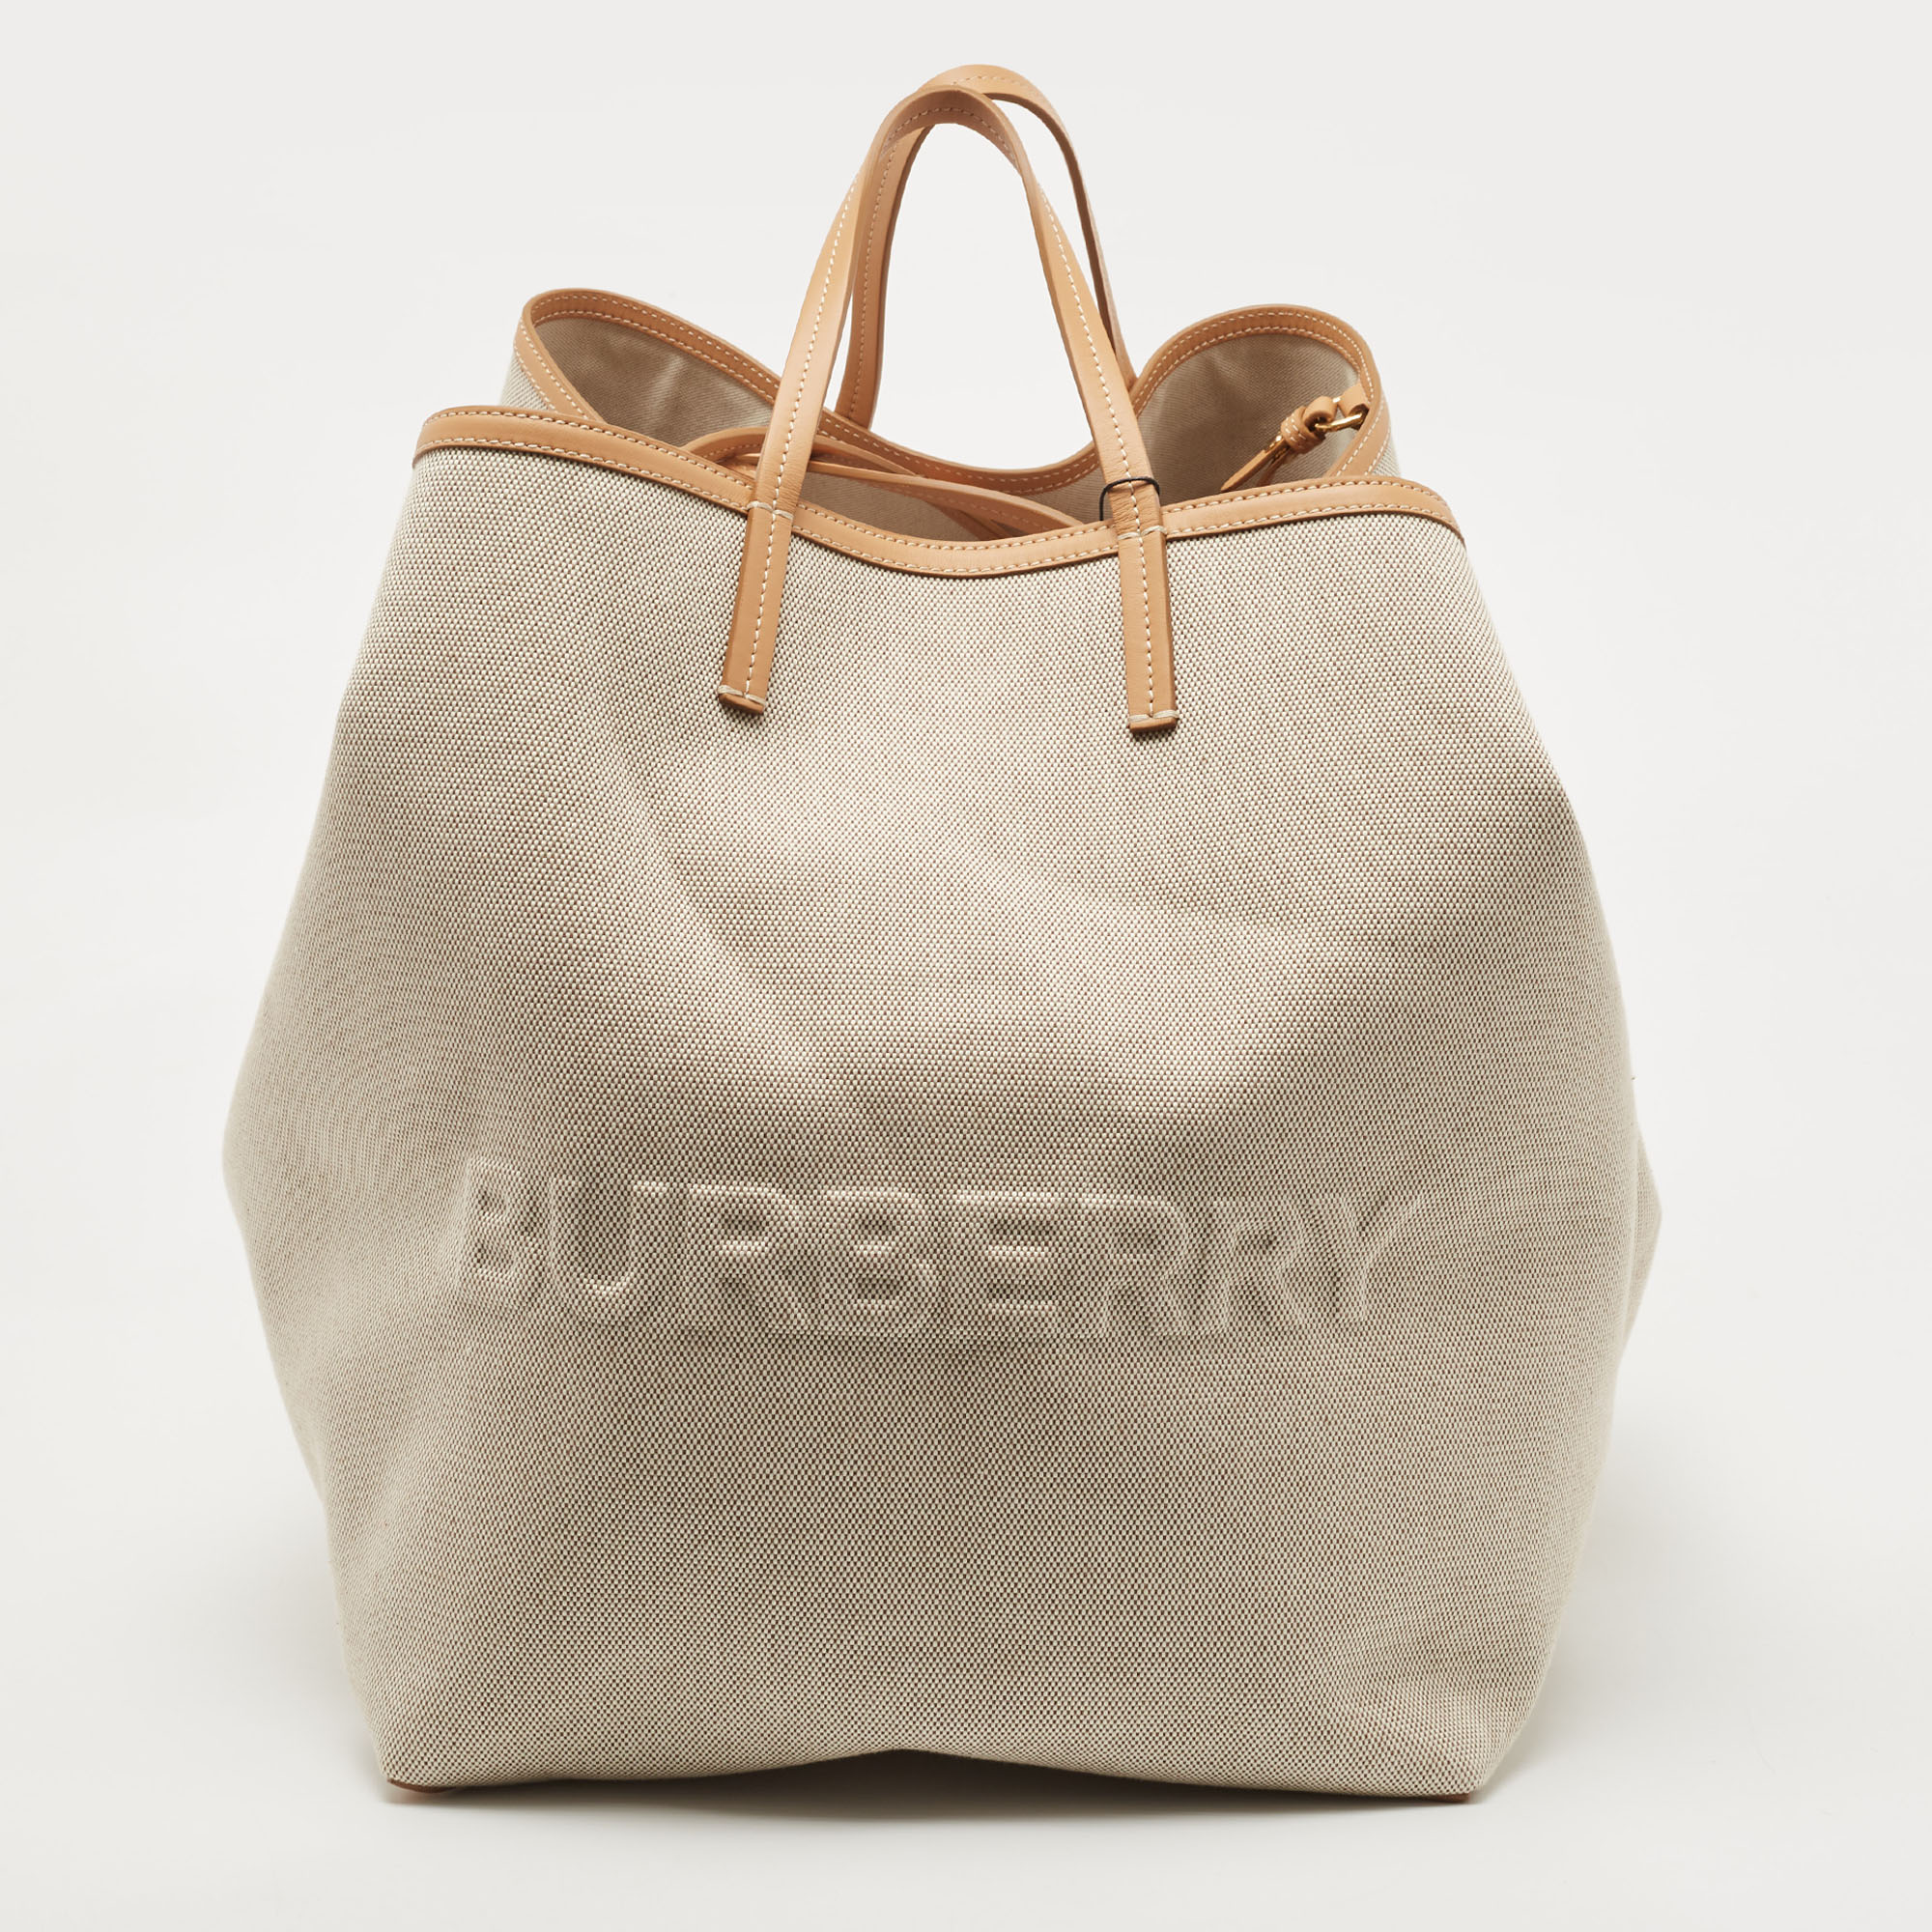 Burberry Natural/Beige Canvas And Leather XL Beach Tote